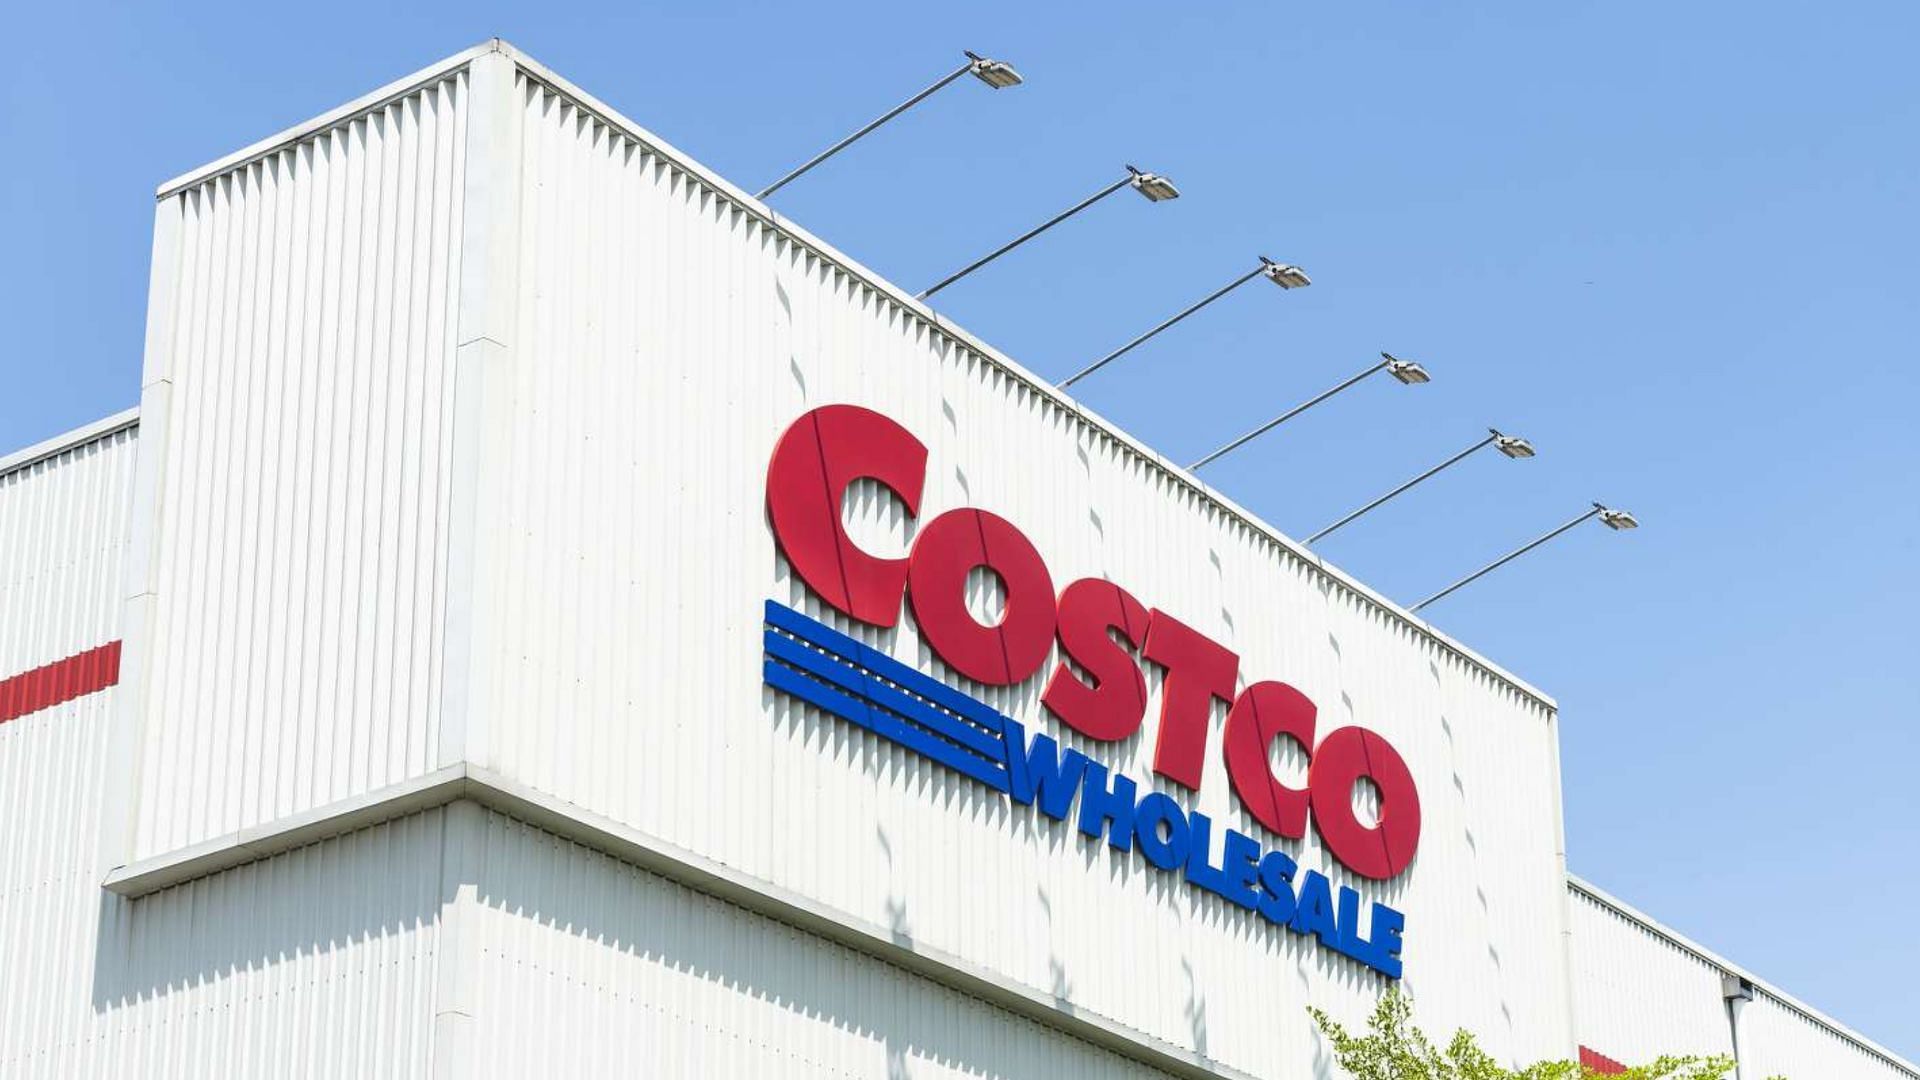 Costco shoppers may have to shell out more cash as food items start to get costlier (Image via Bing-Jhen Hong/Getty Images) 